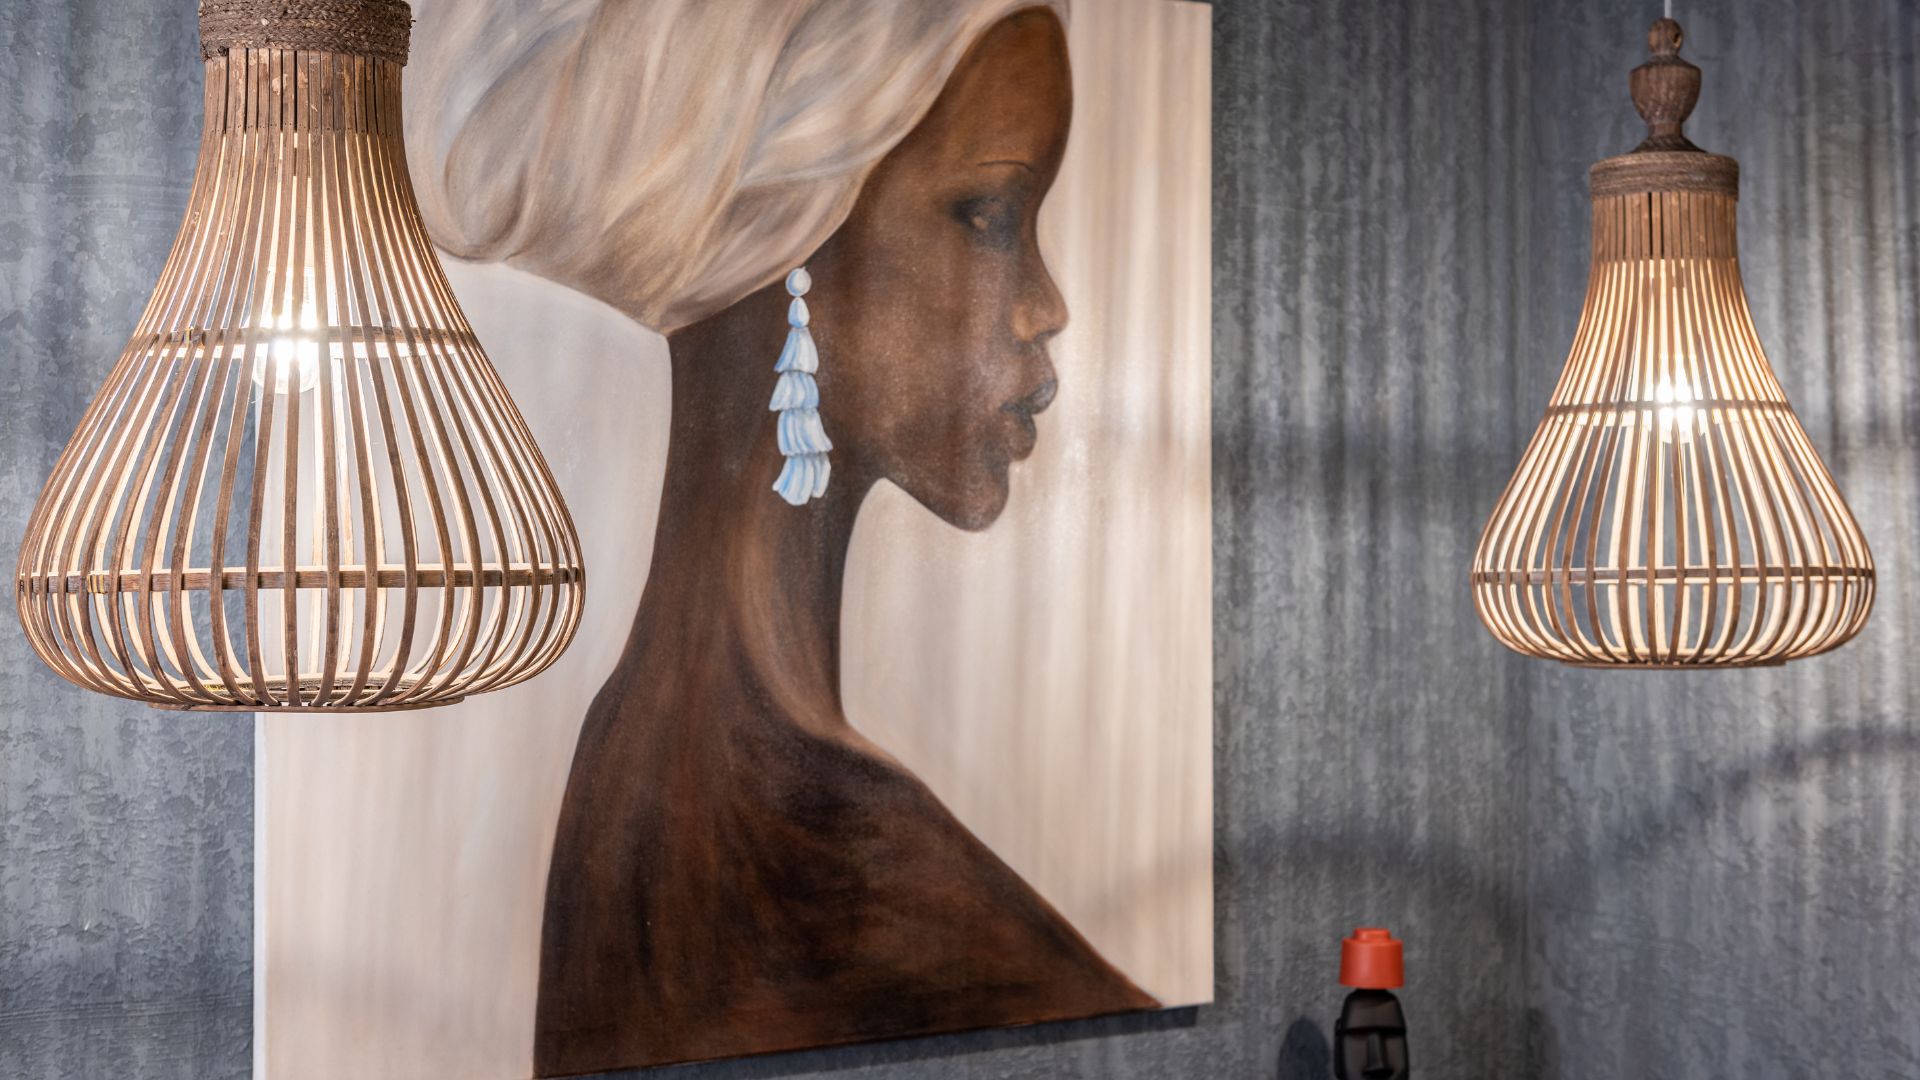 Painting of African woman on wall between shiny lamps